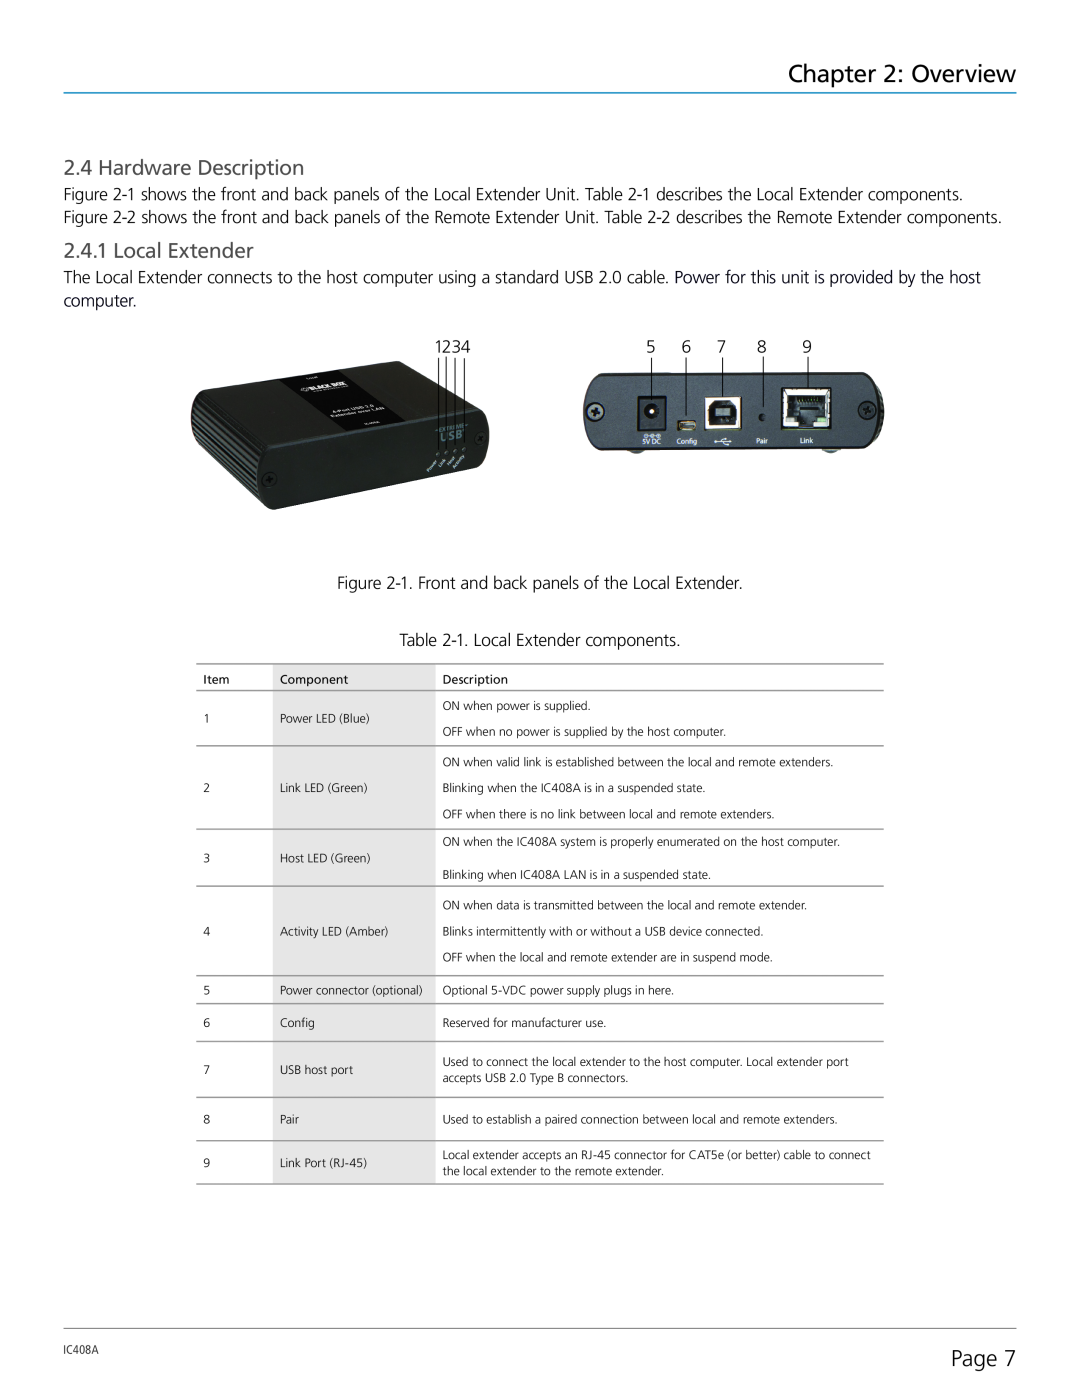 Black Box 4-Port USB 2.0 Extender over LAN manual Hardware Description, Local Extender, Overview, Page, IC408A 